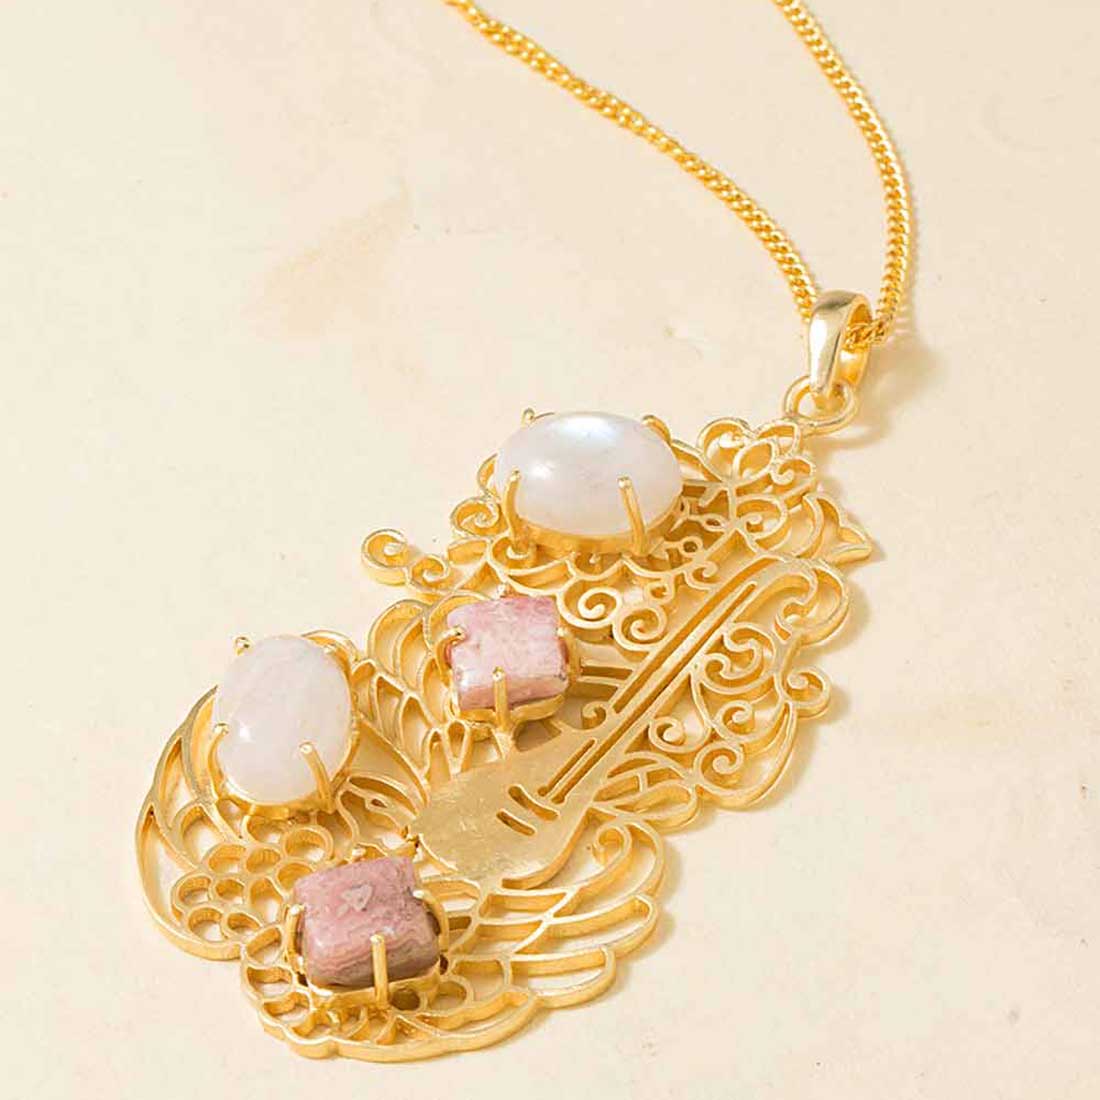 Trendy And Stylish Pendant With Chain